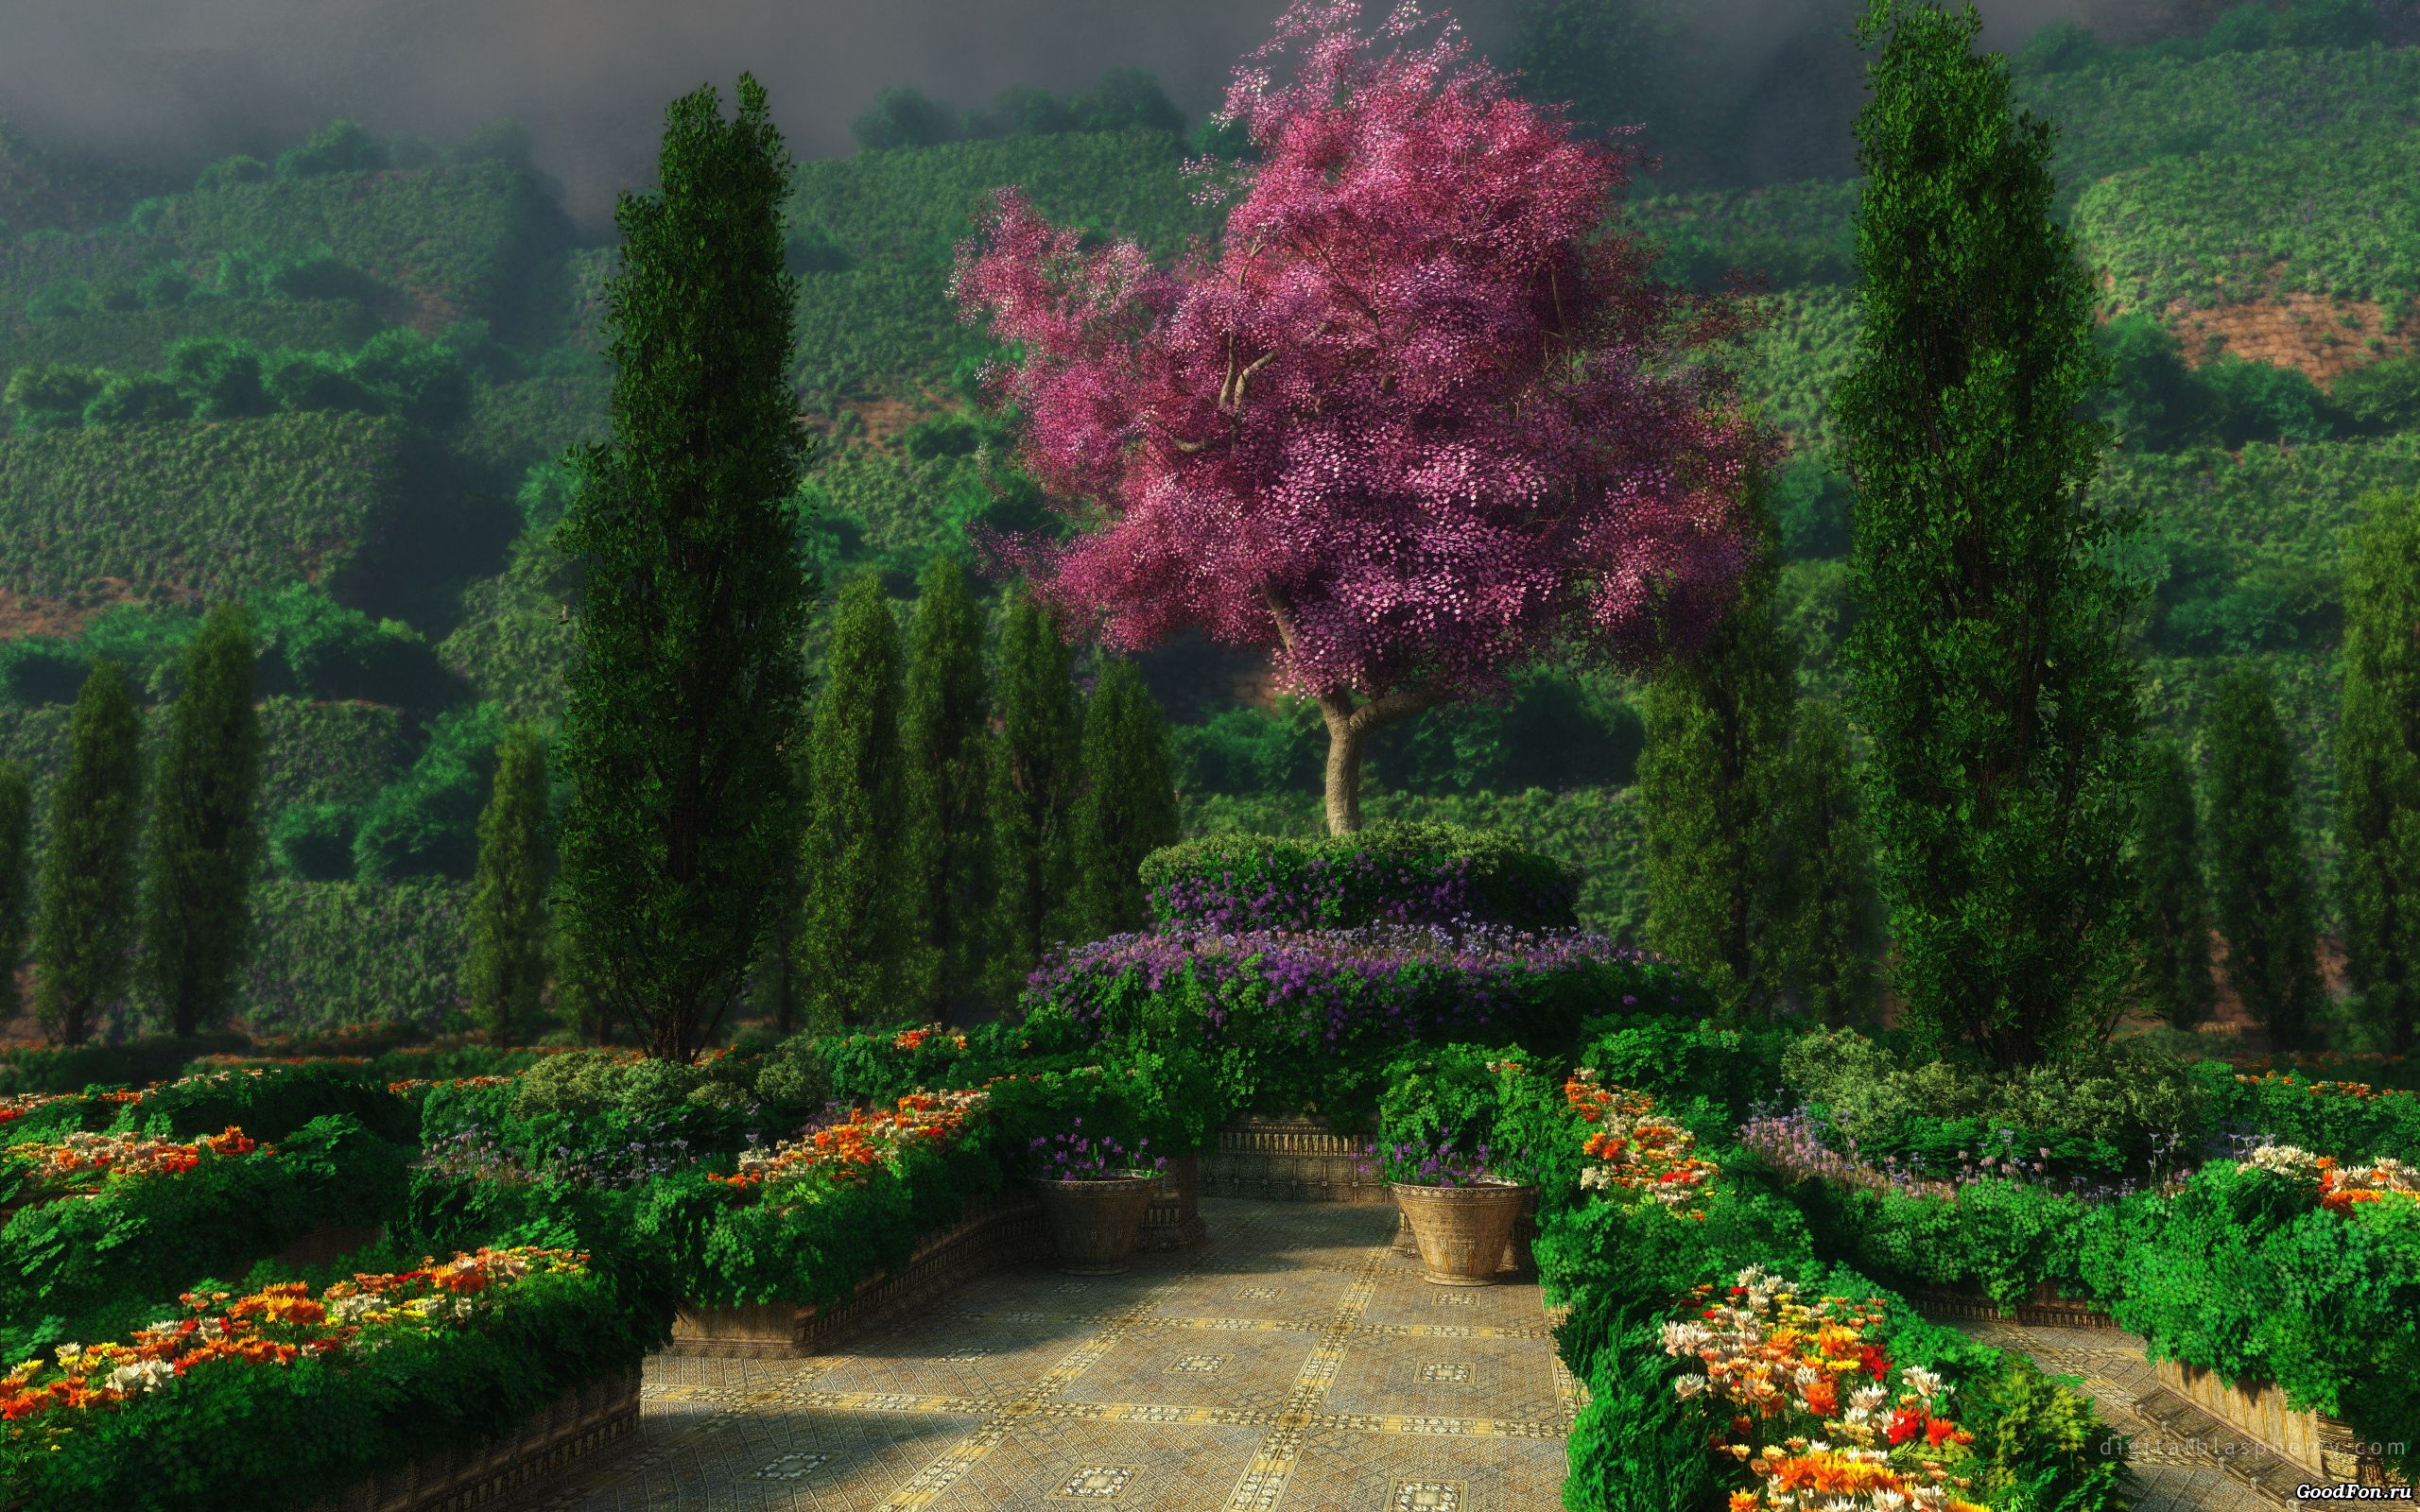 143519 download wallpaper 3d, landscape, flowers, trees, garden screensavers and pictures for free